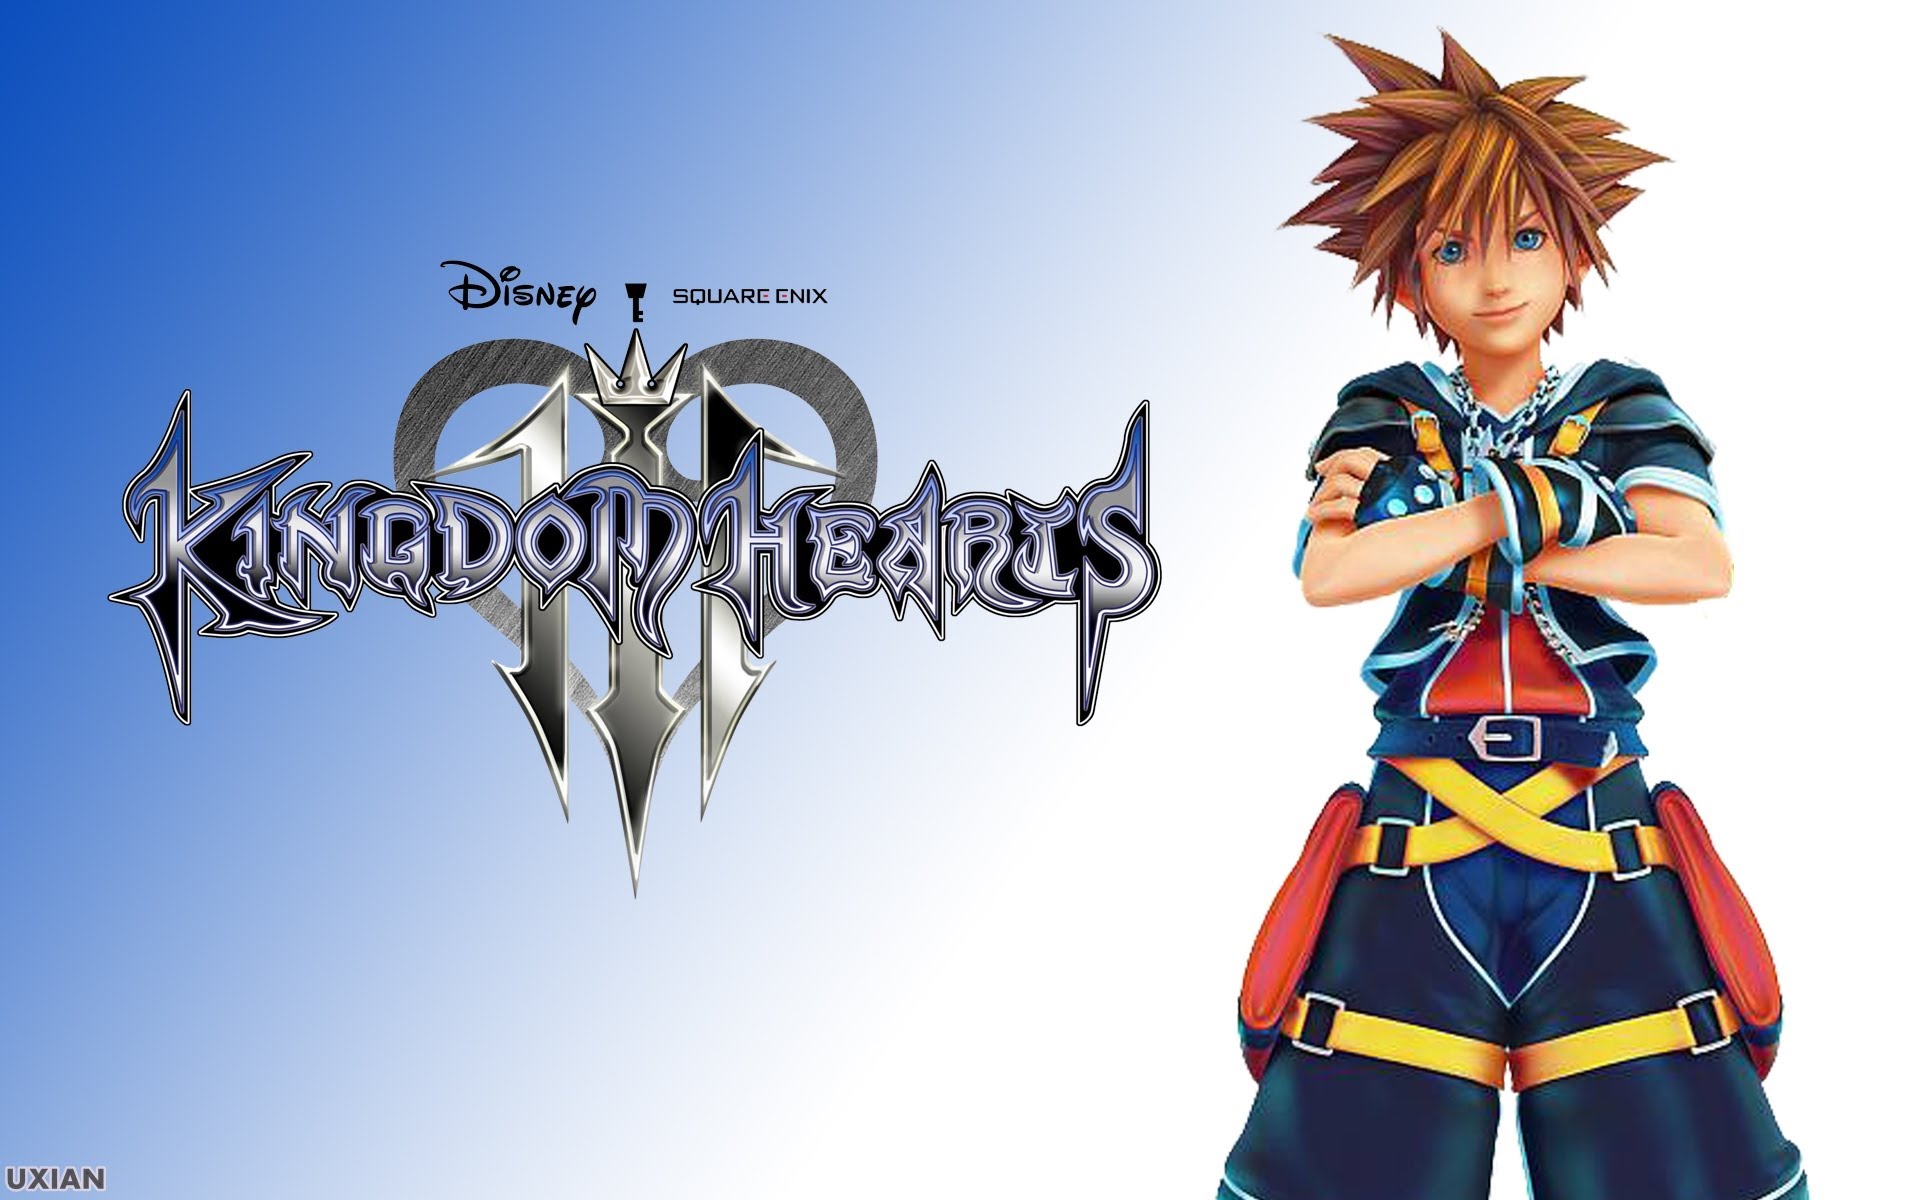 How Will Soras Outfit Change In Kingdom Hearts 3